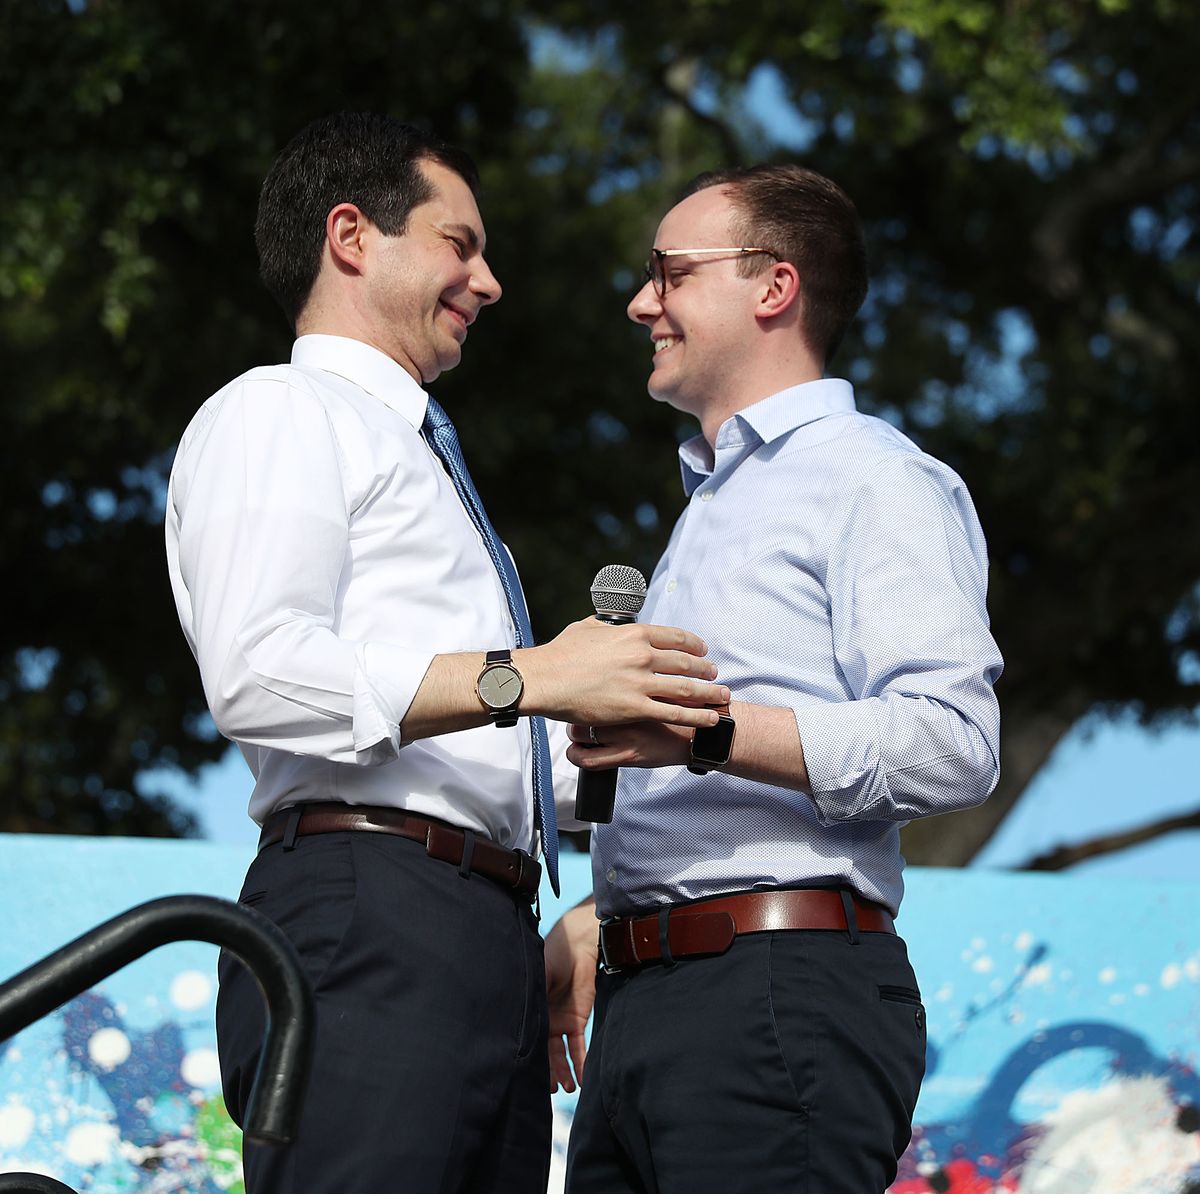 Presidential Candidate Pete Buttigieg Holds Grassroots Fundraiser In Miami